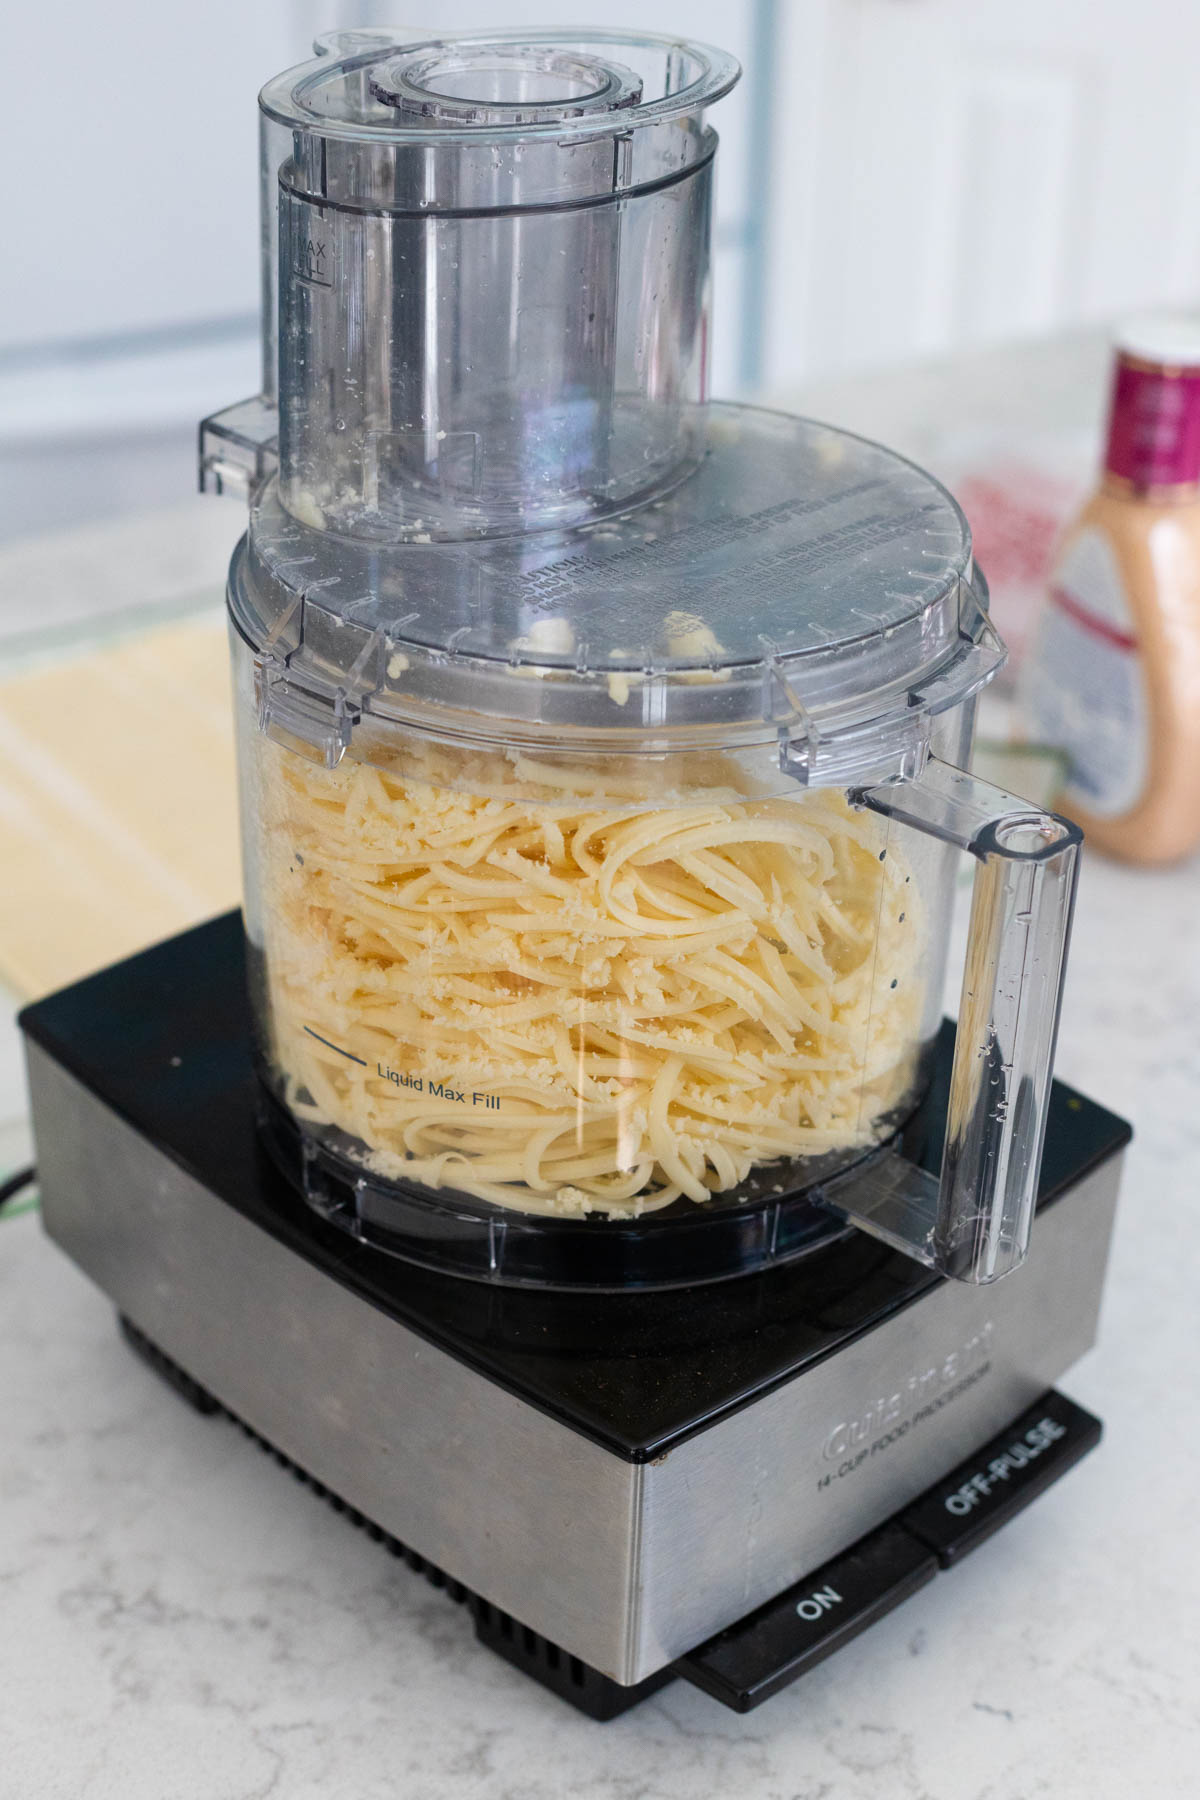 The swiss cheese has been shredded in a food processor.